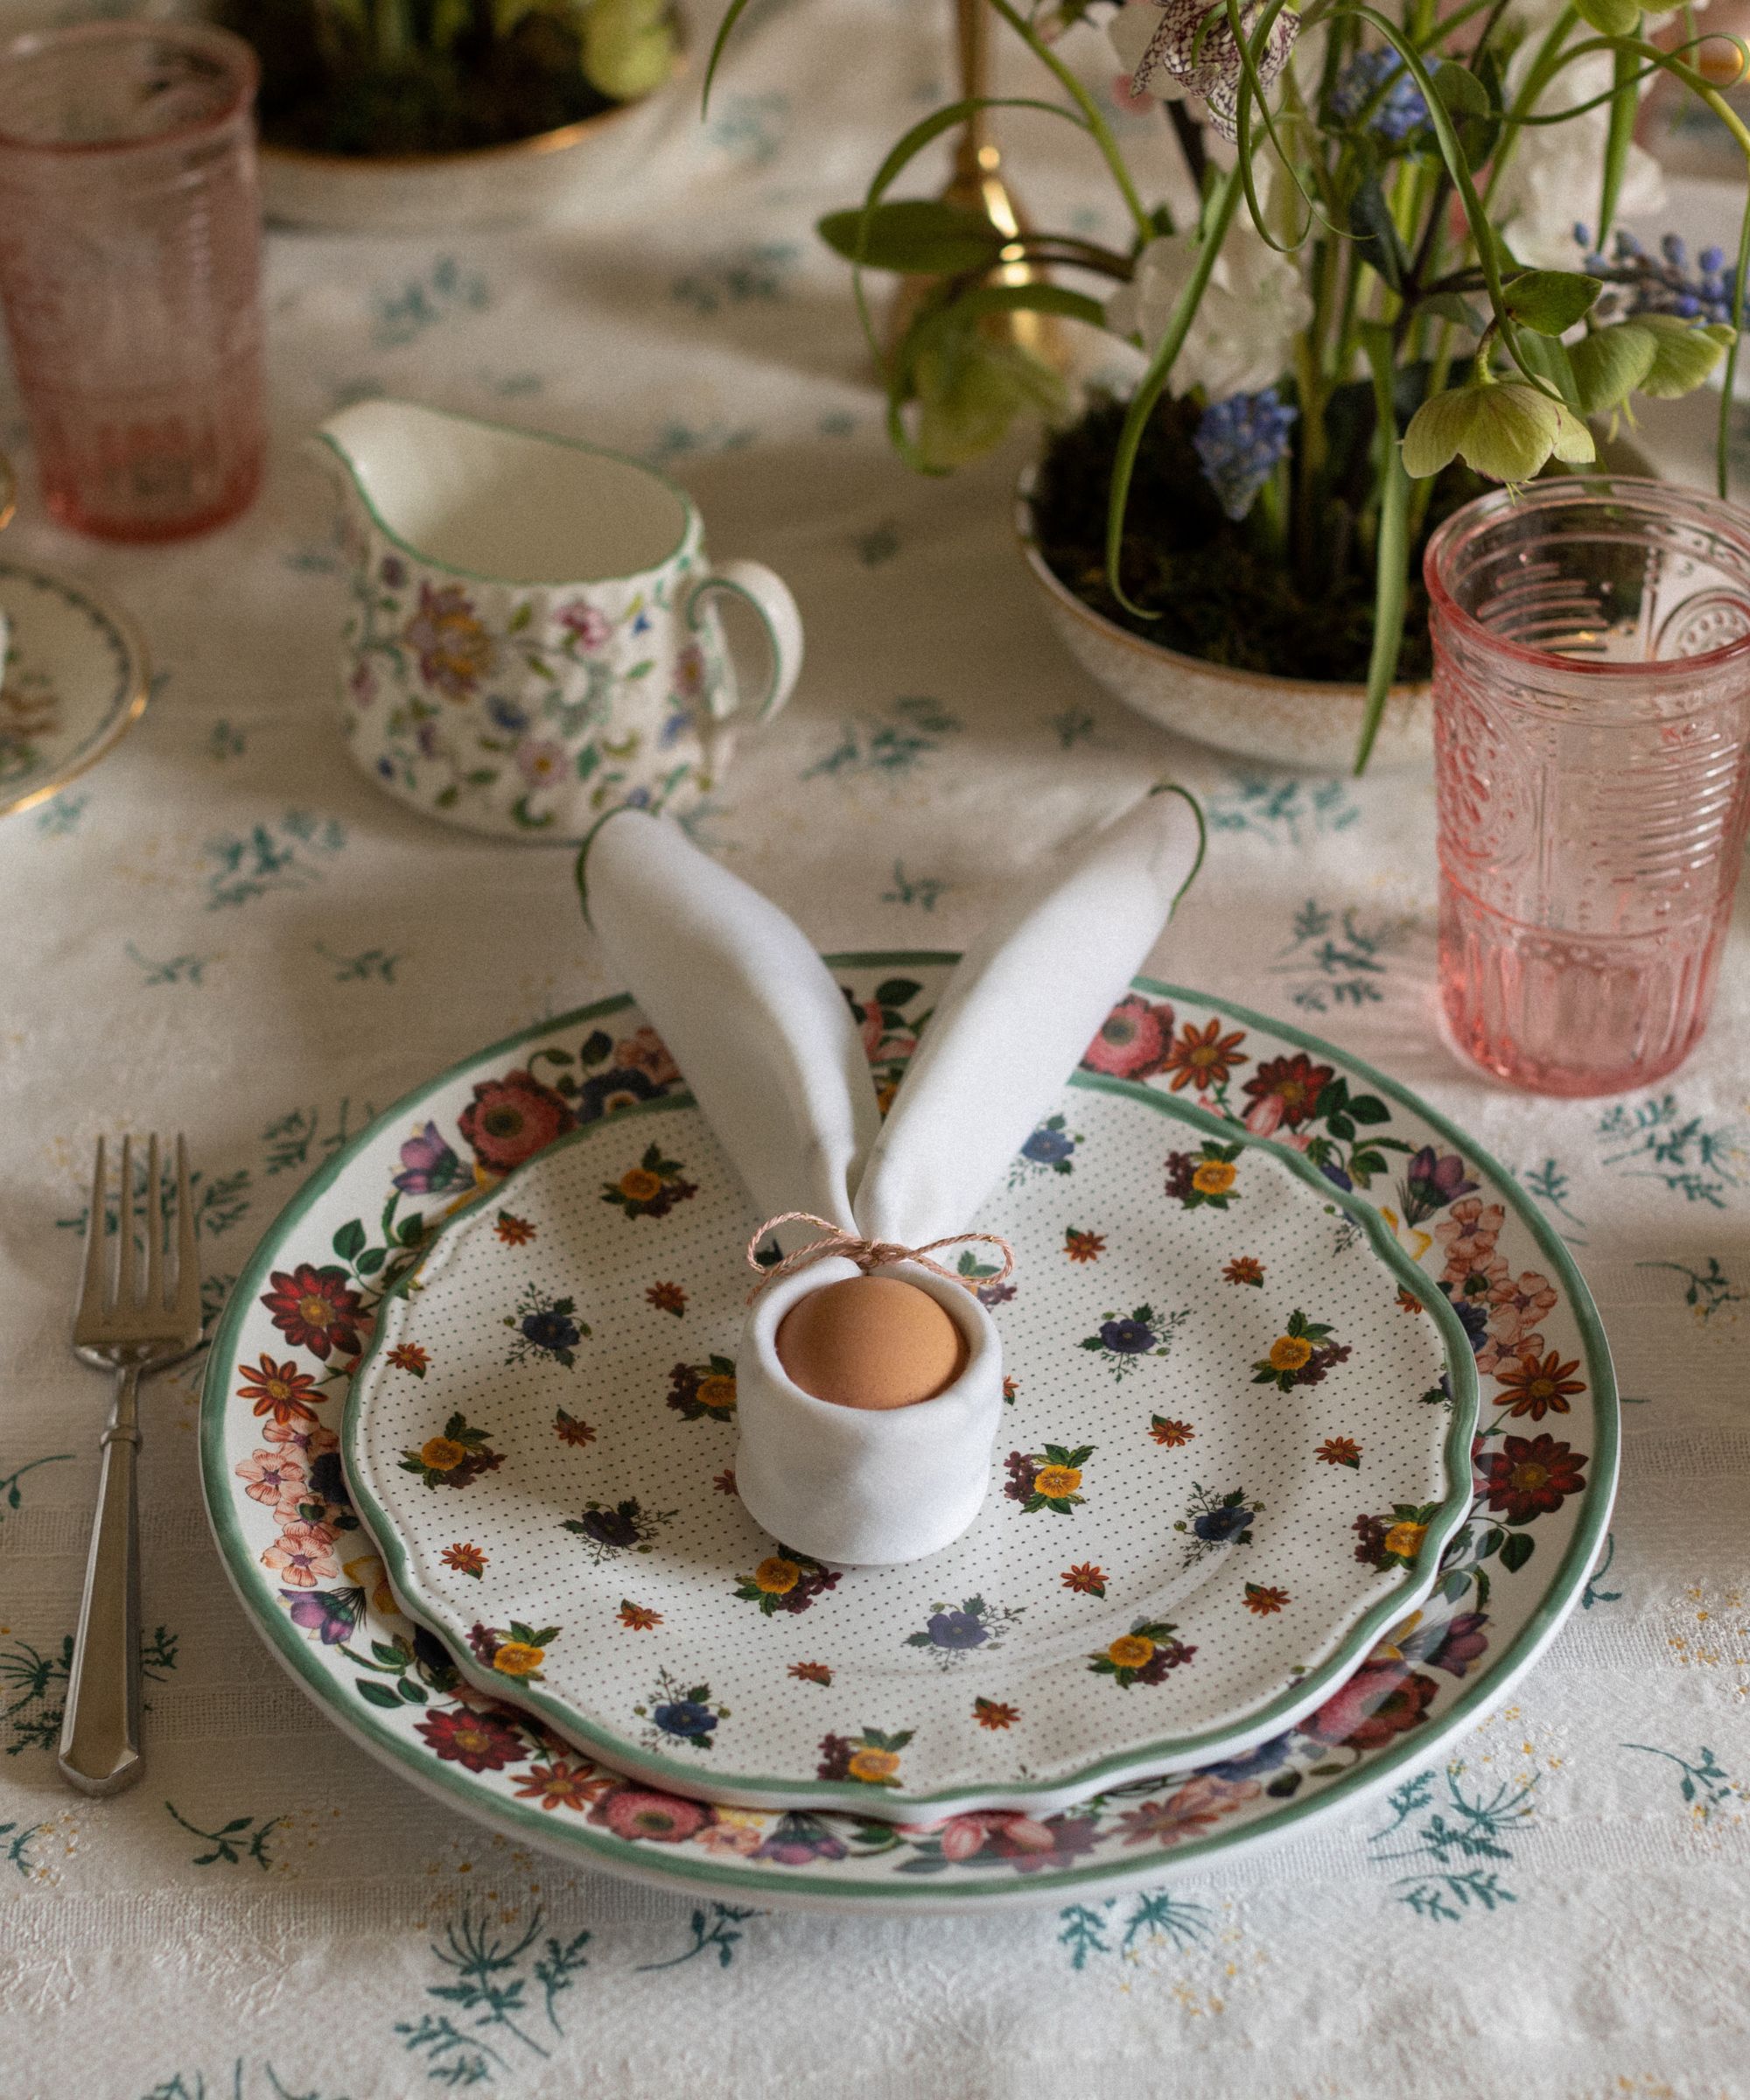 napkin folded around an egg to resemble the easter bunny on a vintage plate for easter table